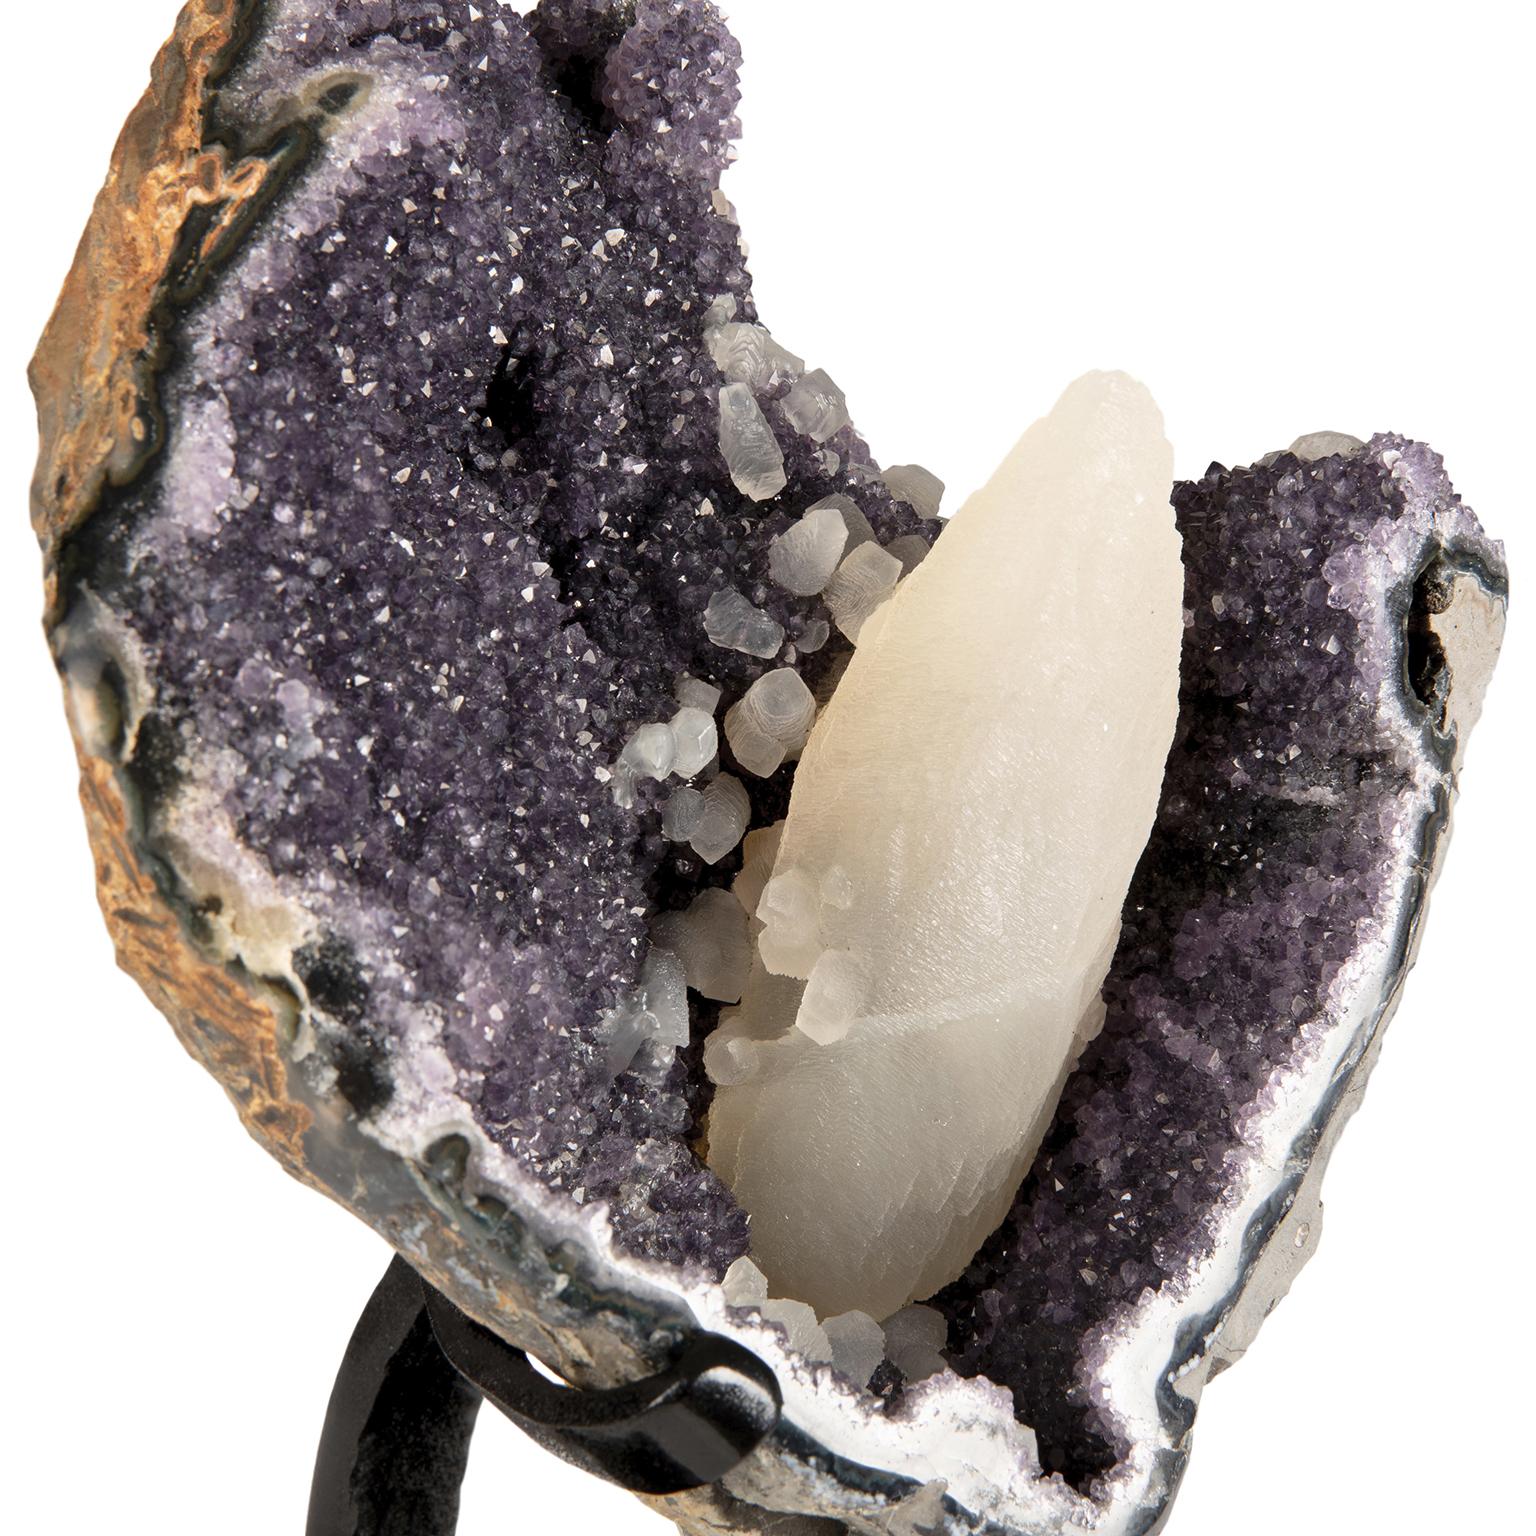 Uruguayan Rough Amethyst Cluster with Central Calcite Formation and Calcite Accents